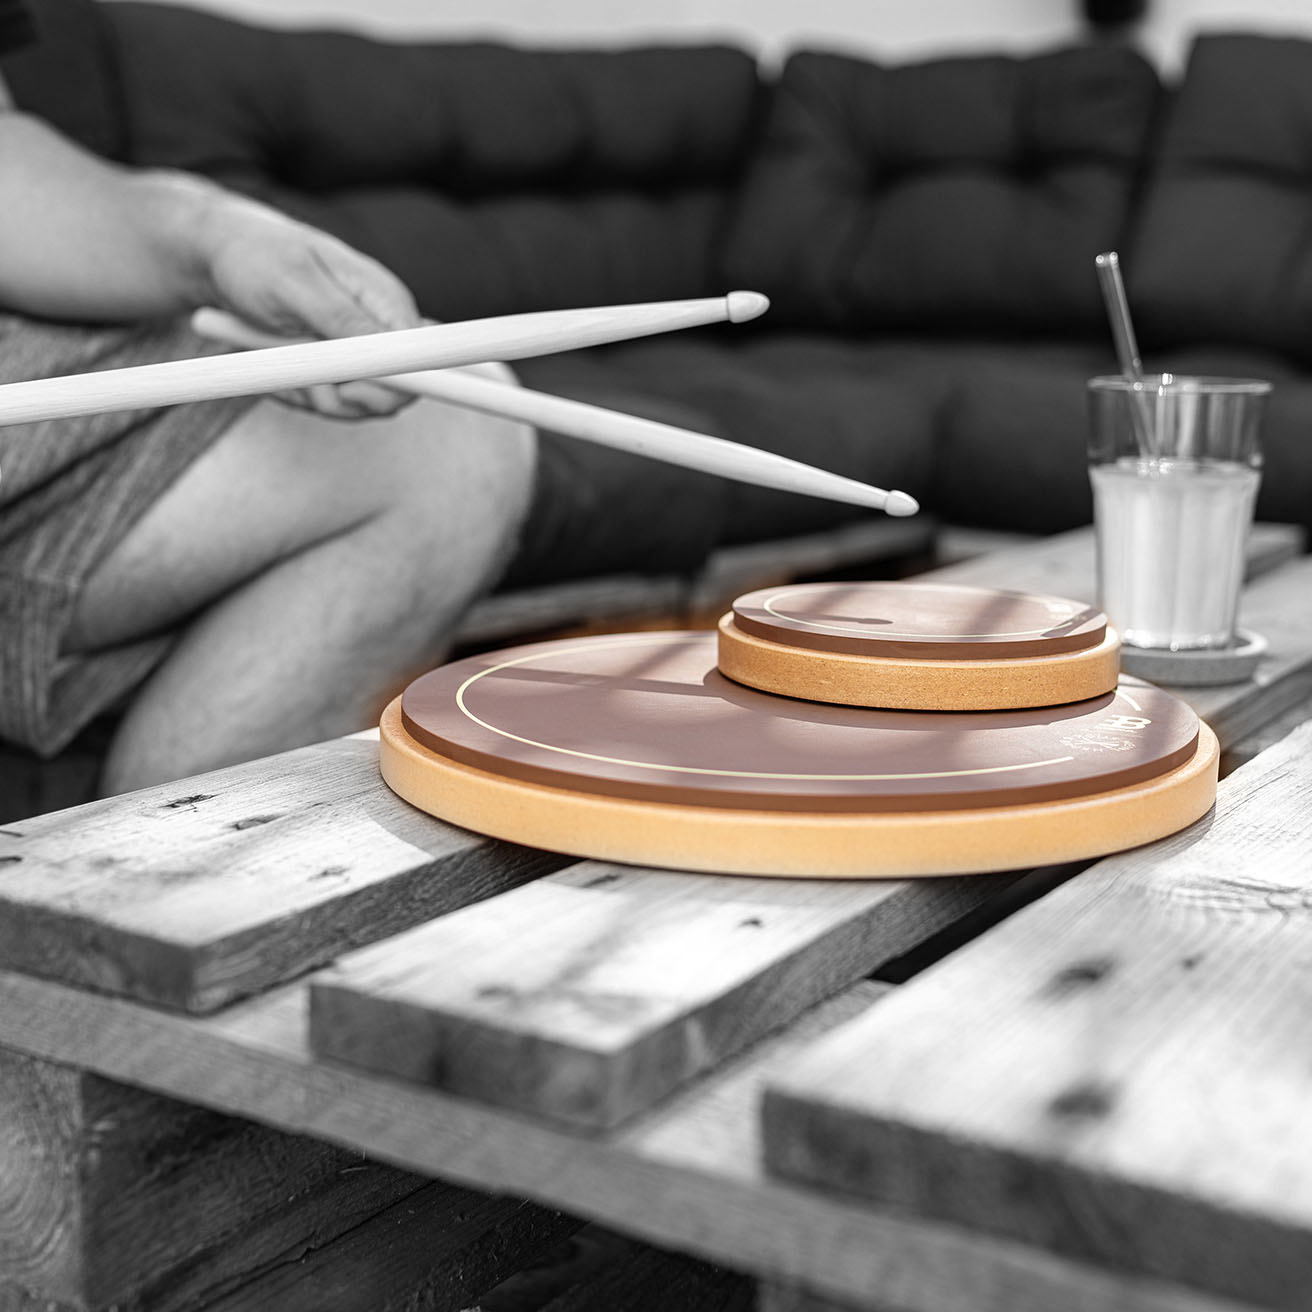 Build speed, power and precision with the Meinl Stick and Brush Practice Pads